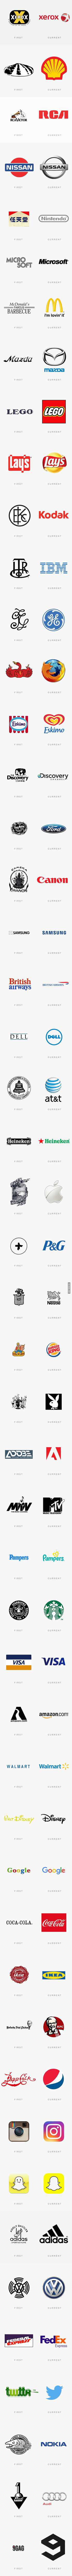 50 Famous Logos Then And Now